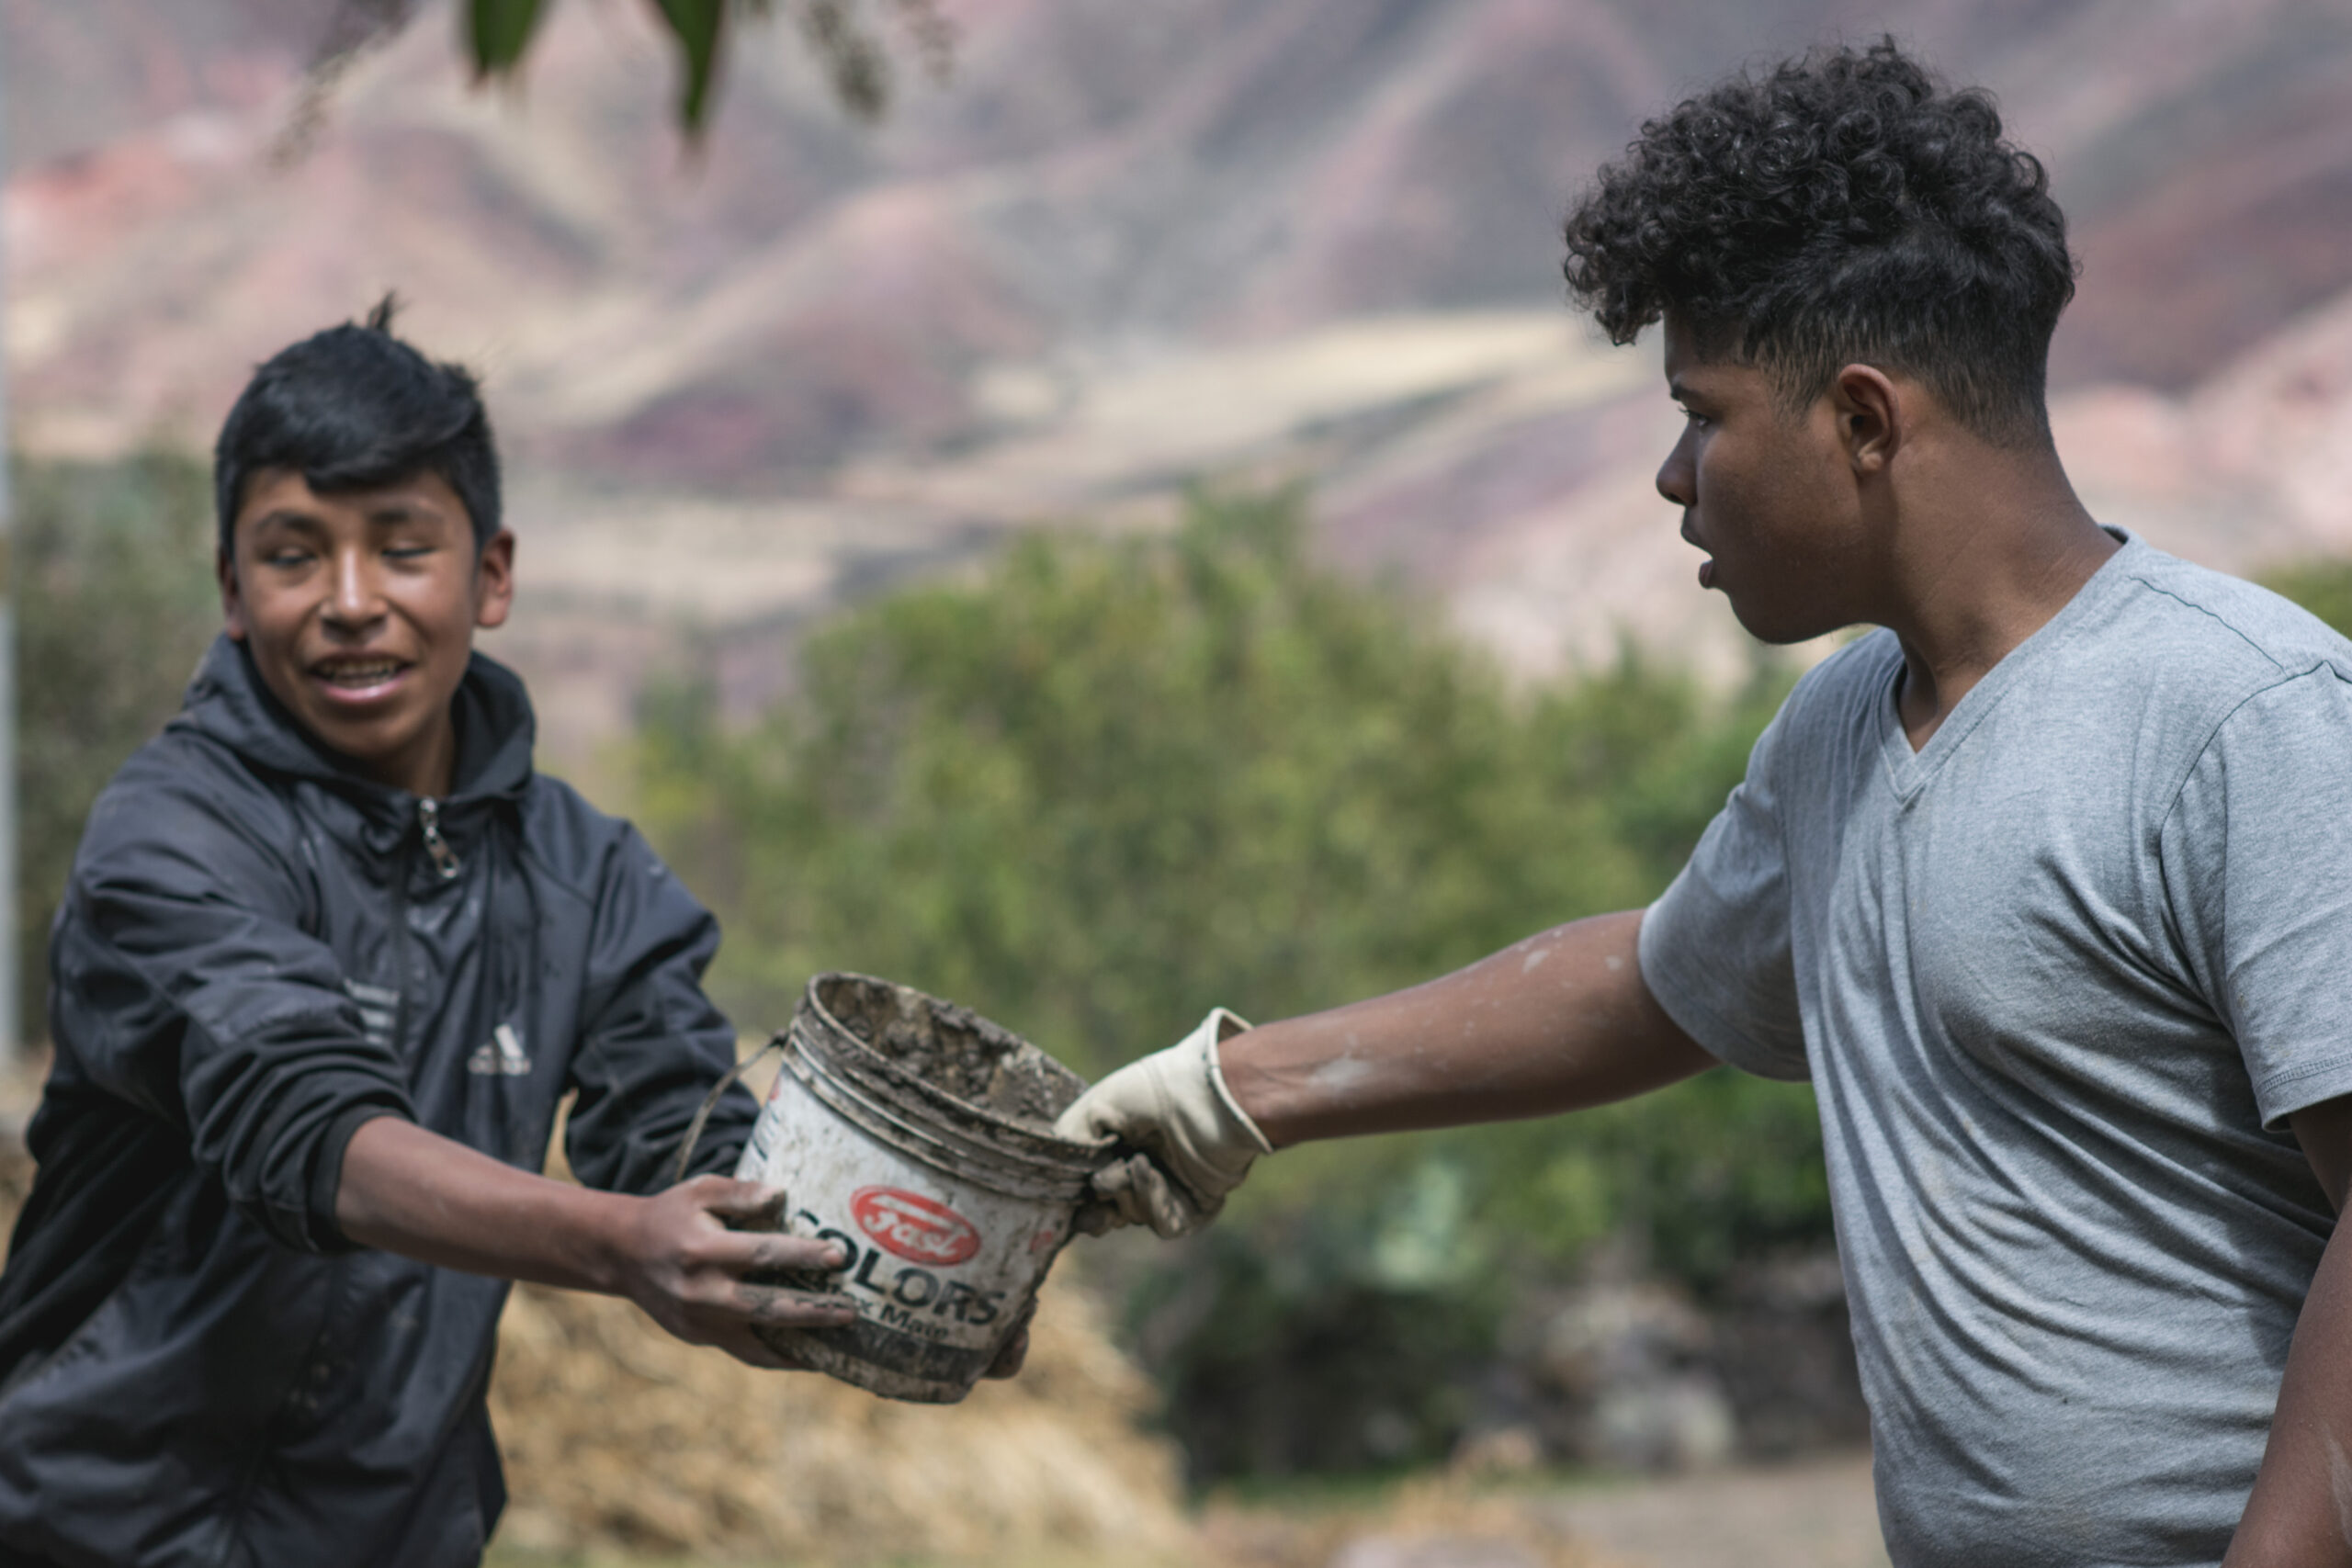 Teen volunteers in Peru pass cement to each other while working on irrigation